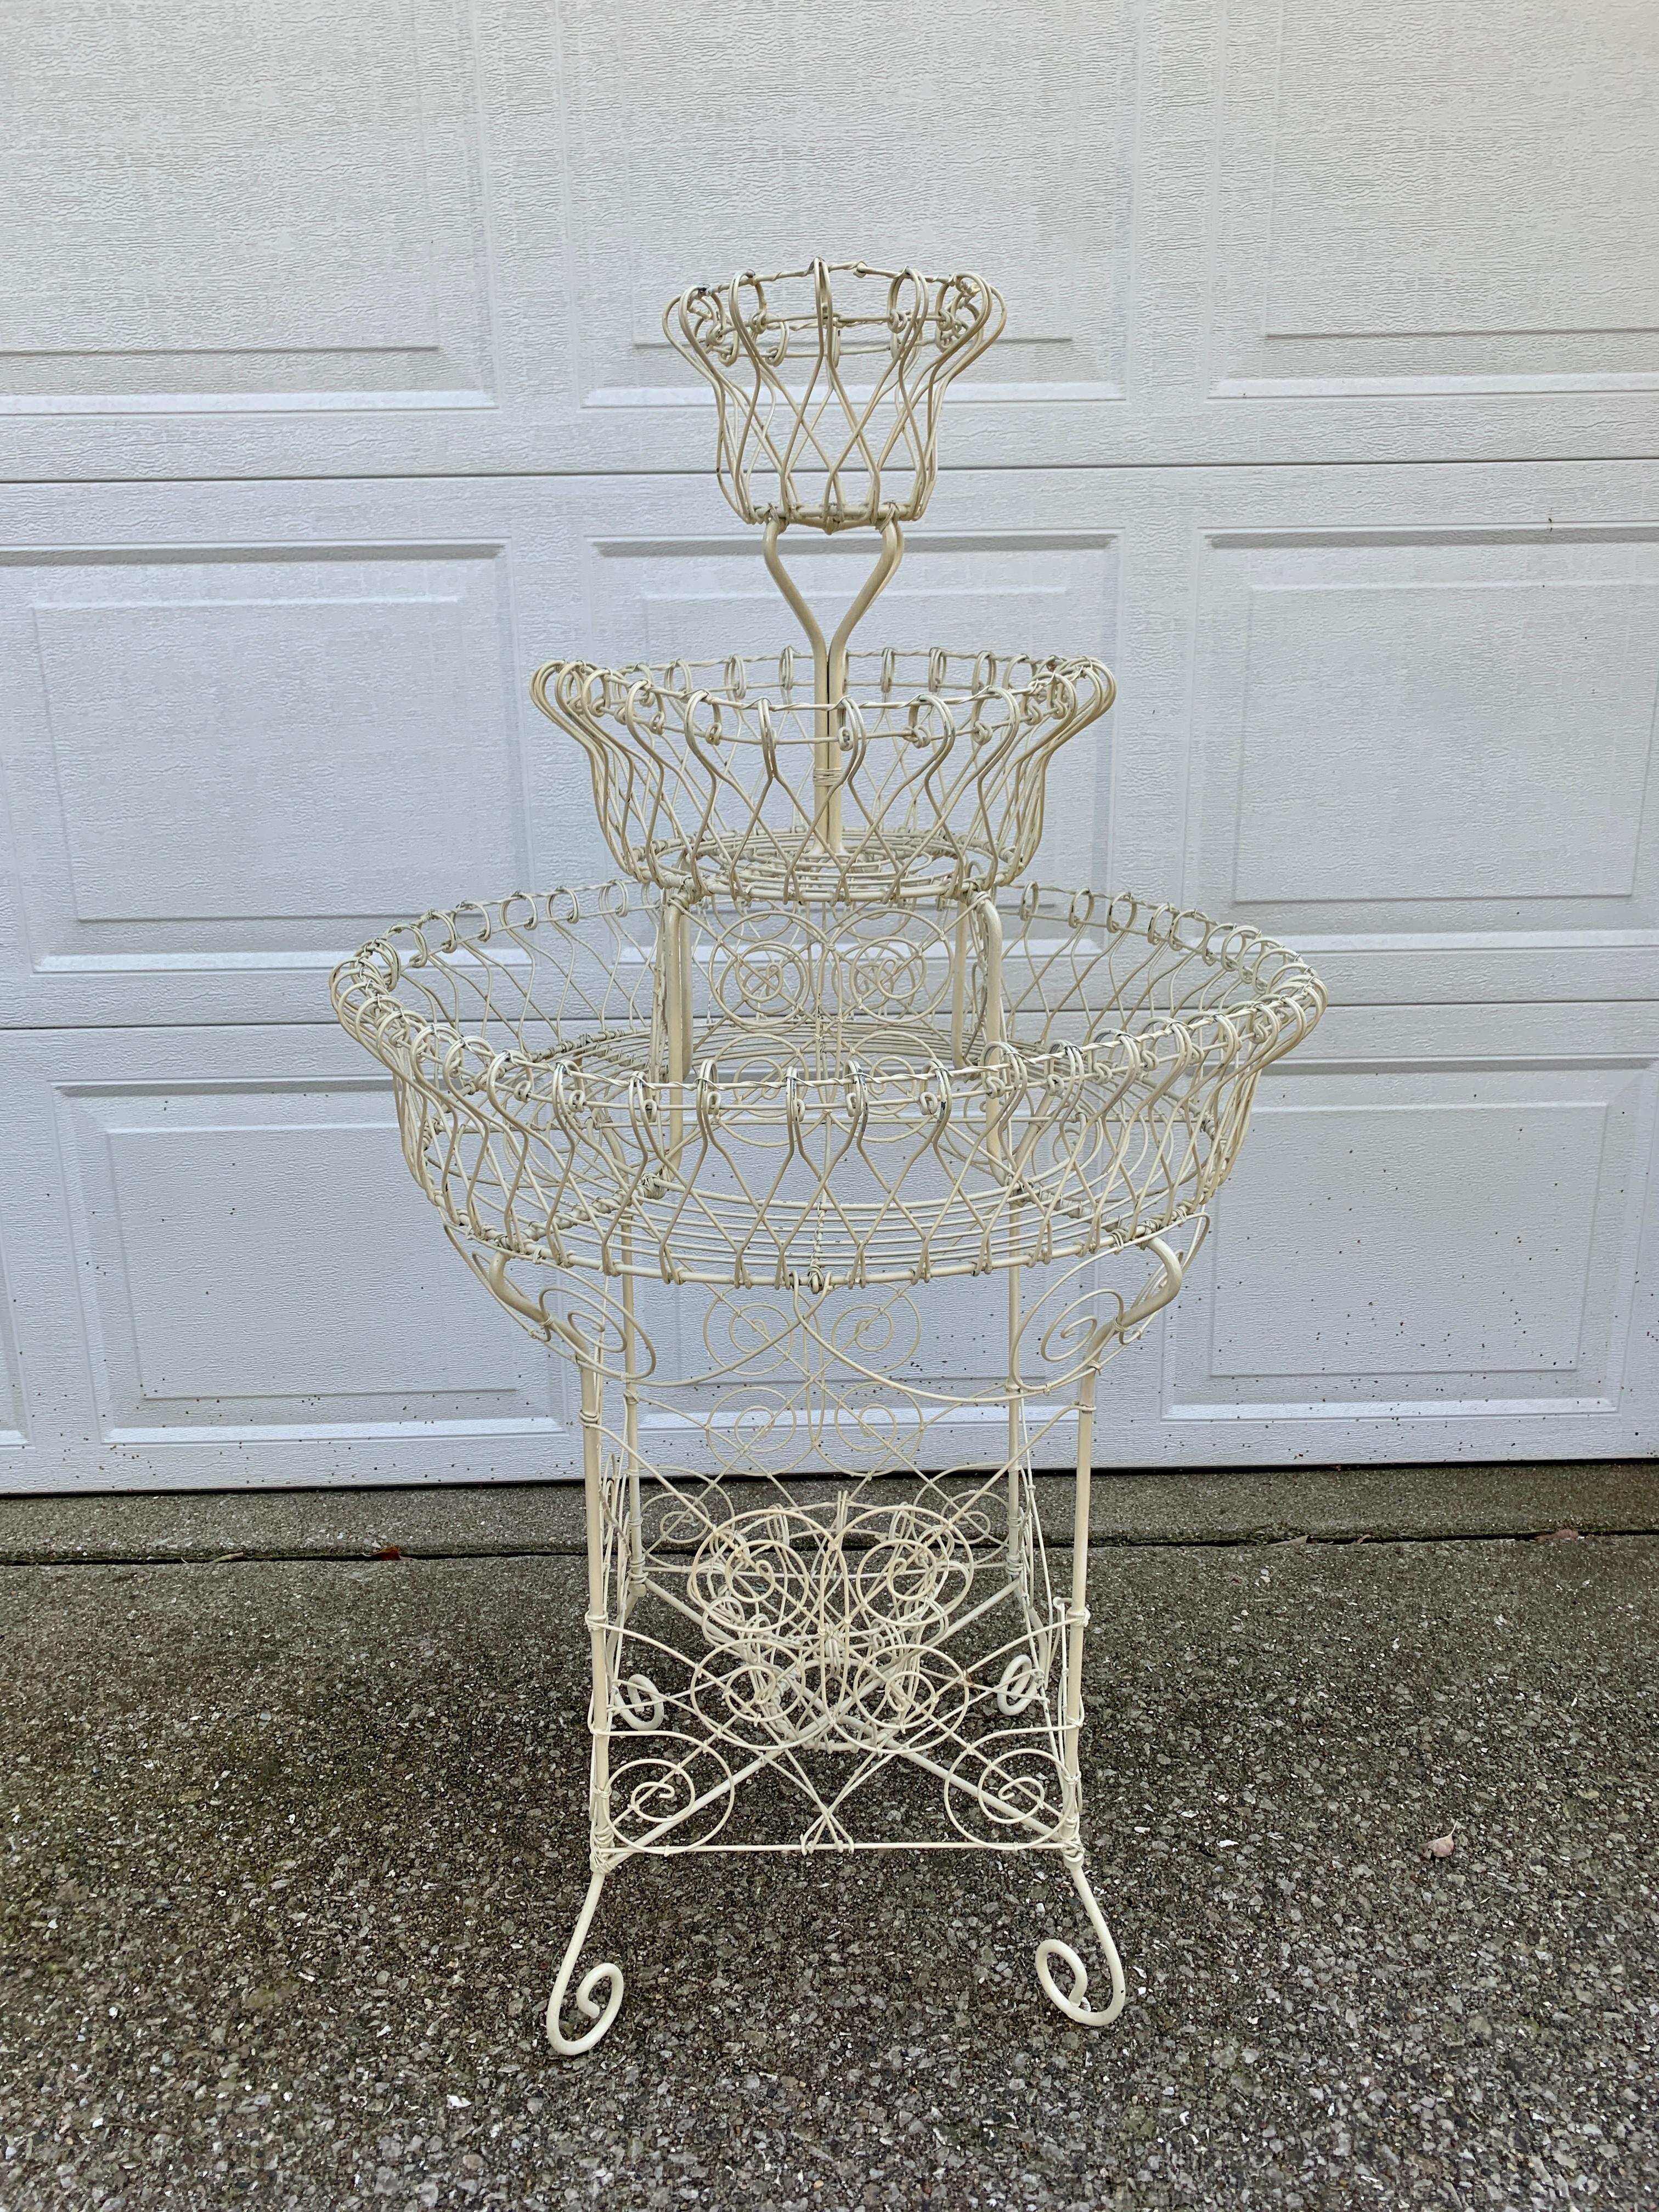 used wrought iron plant stands